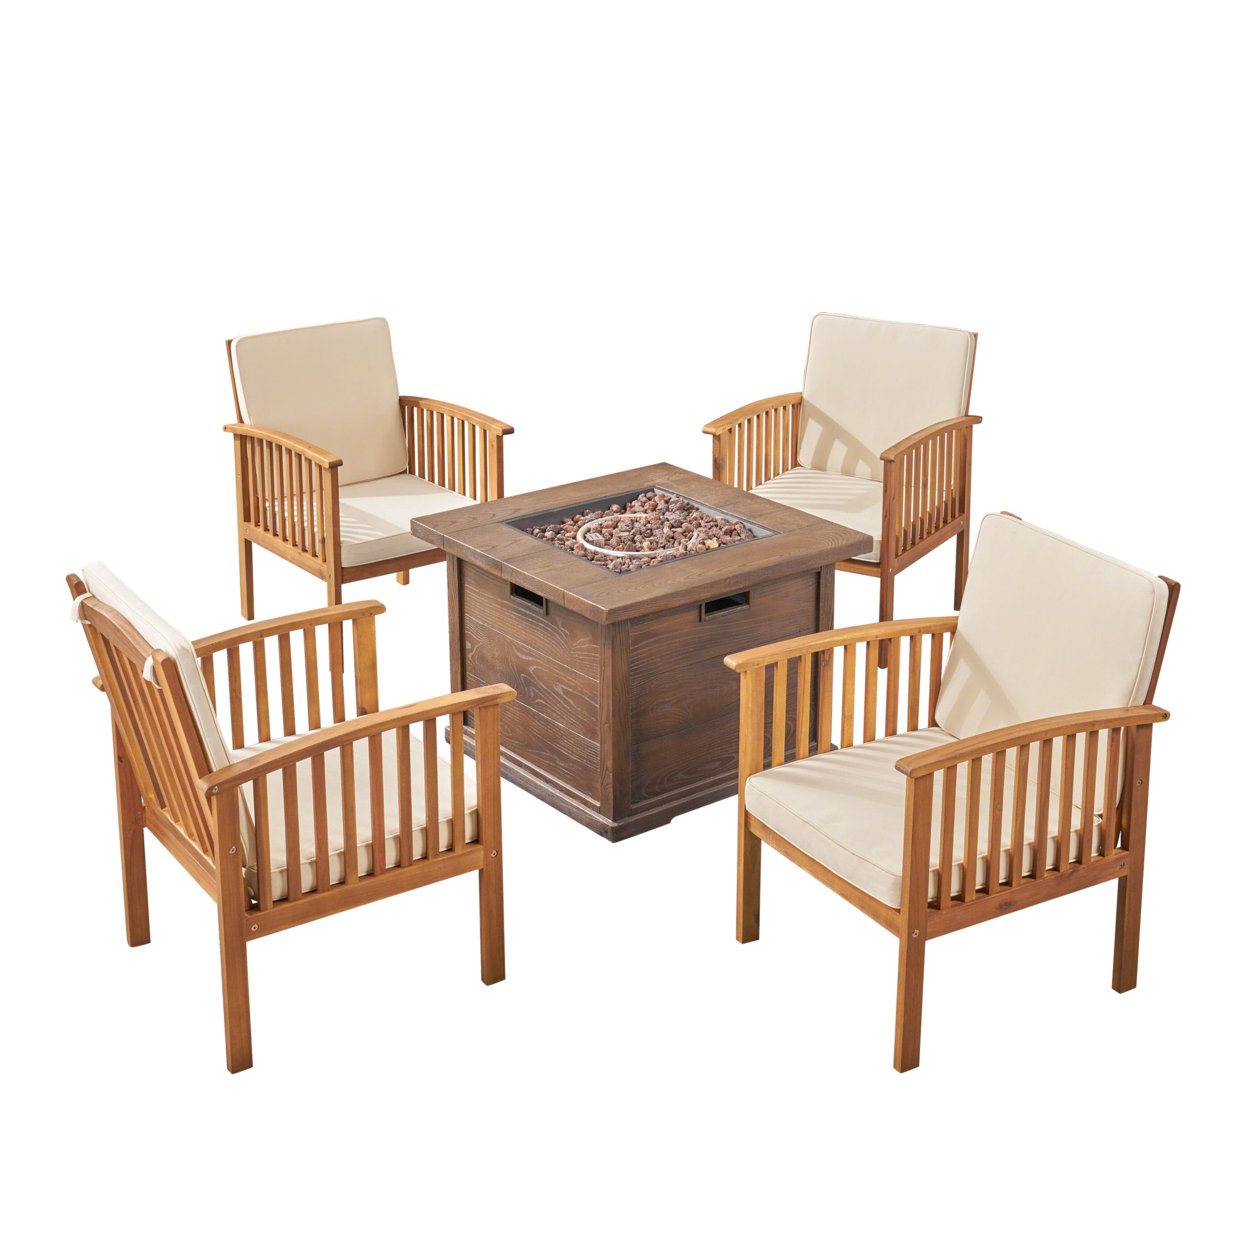 Carol Outdoor 4-Seater Acacia Wood Club Chairs With Firepit - Brown Patina Finish + Dark Teal + Brown + Wood Pattern